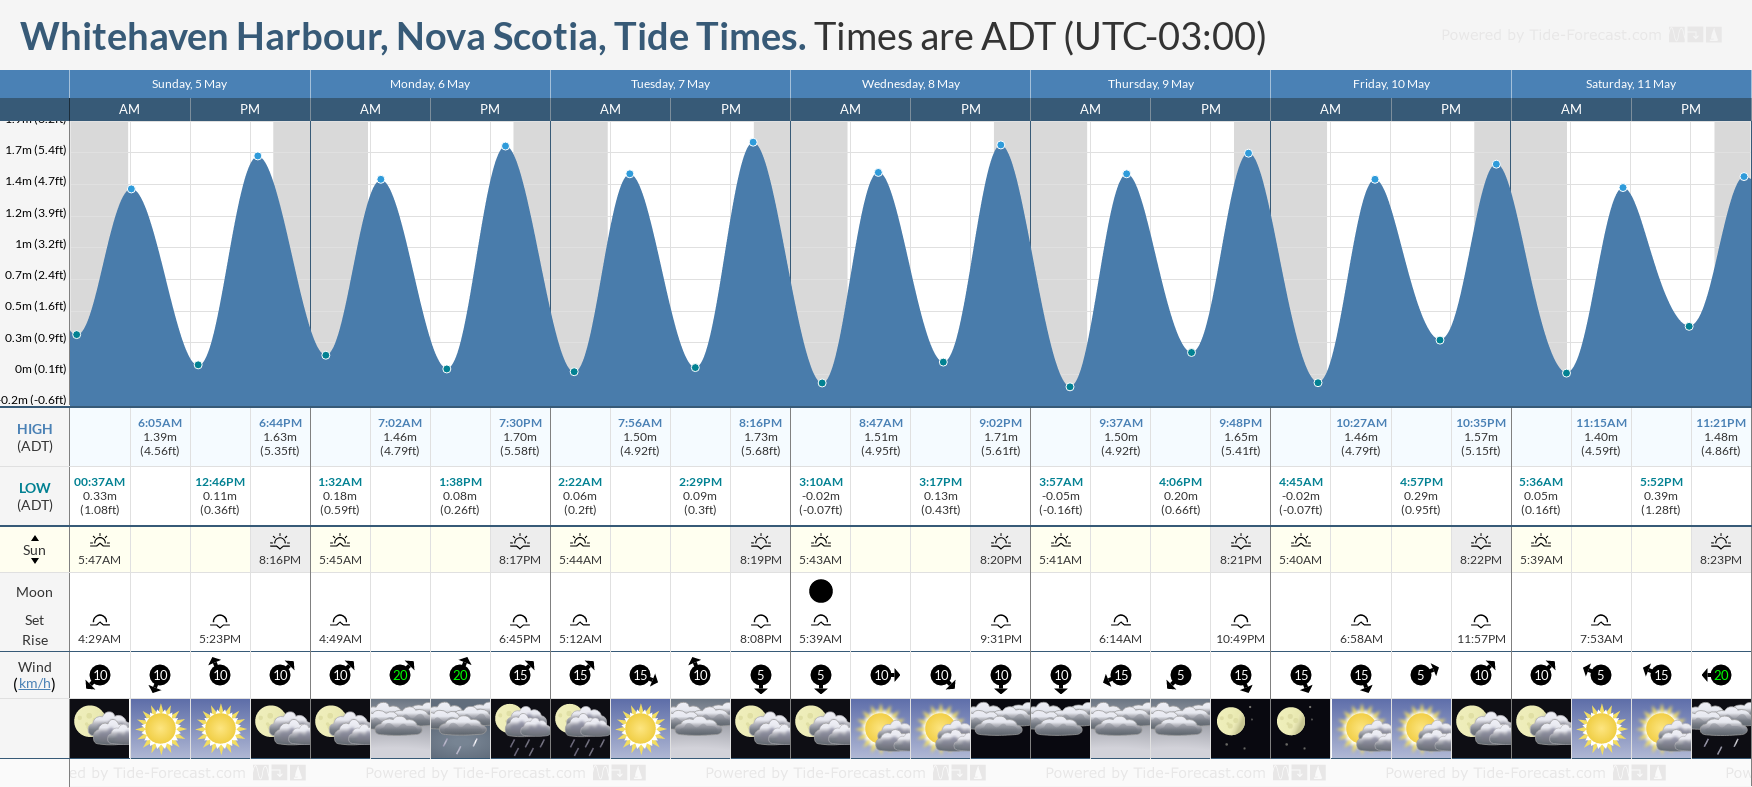 Whitehaven Harbour, Nova Scotia Tide Chart including high and low tide tide times for the next 7 days